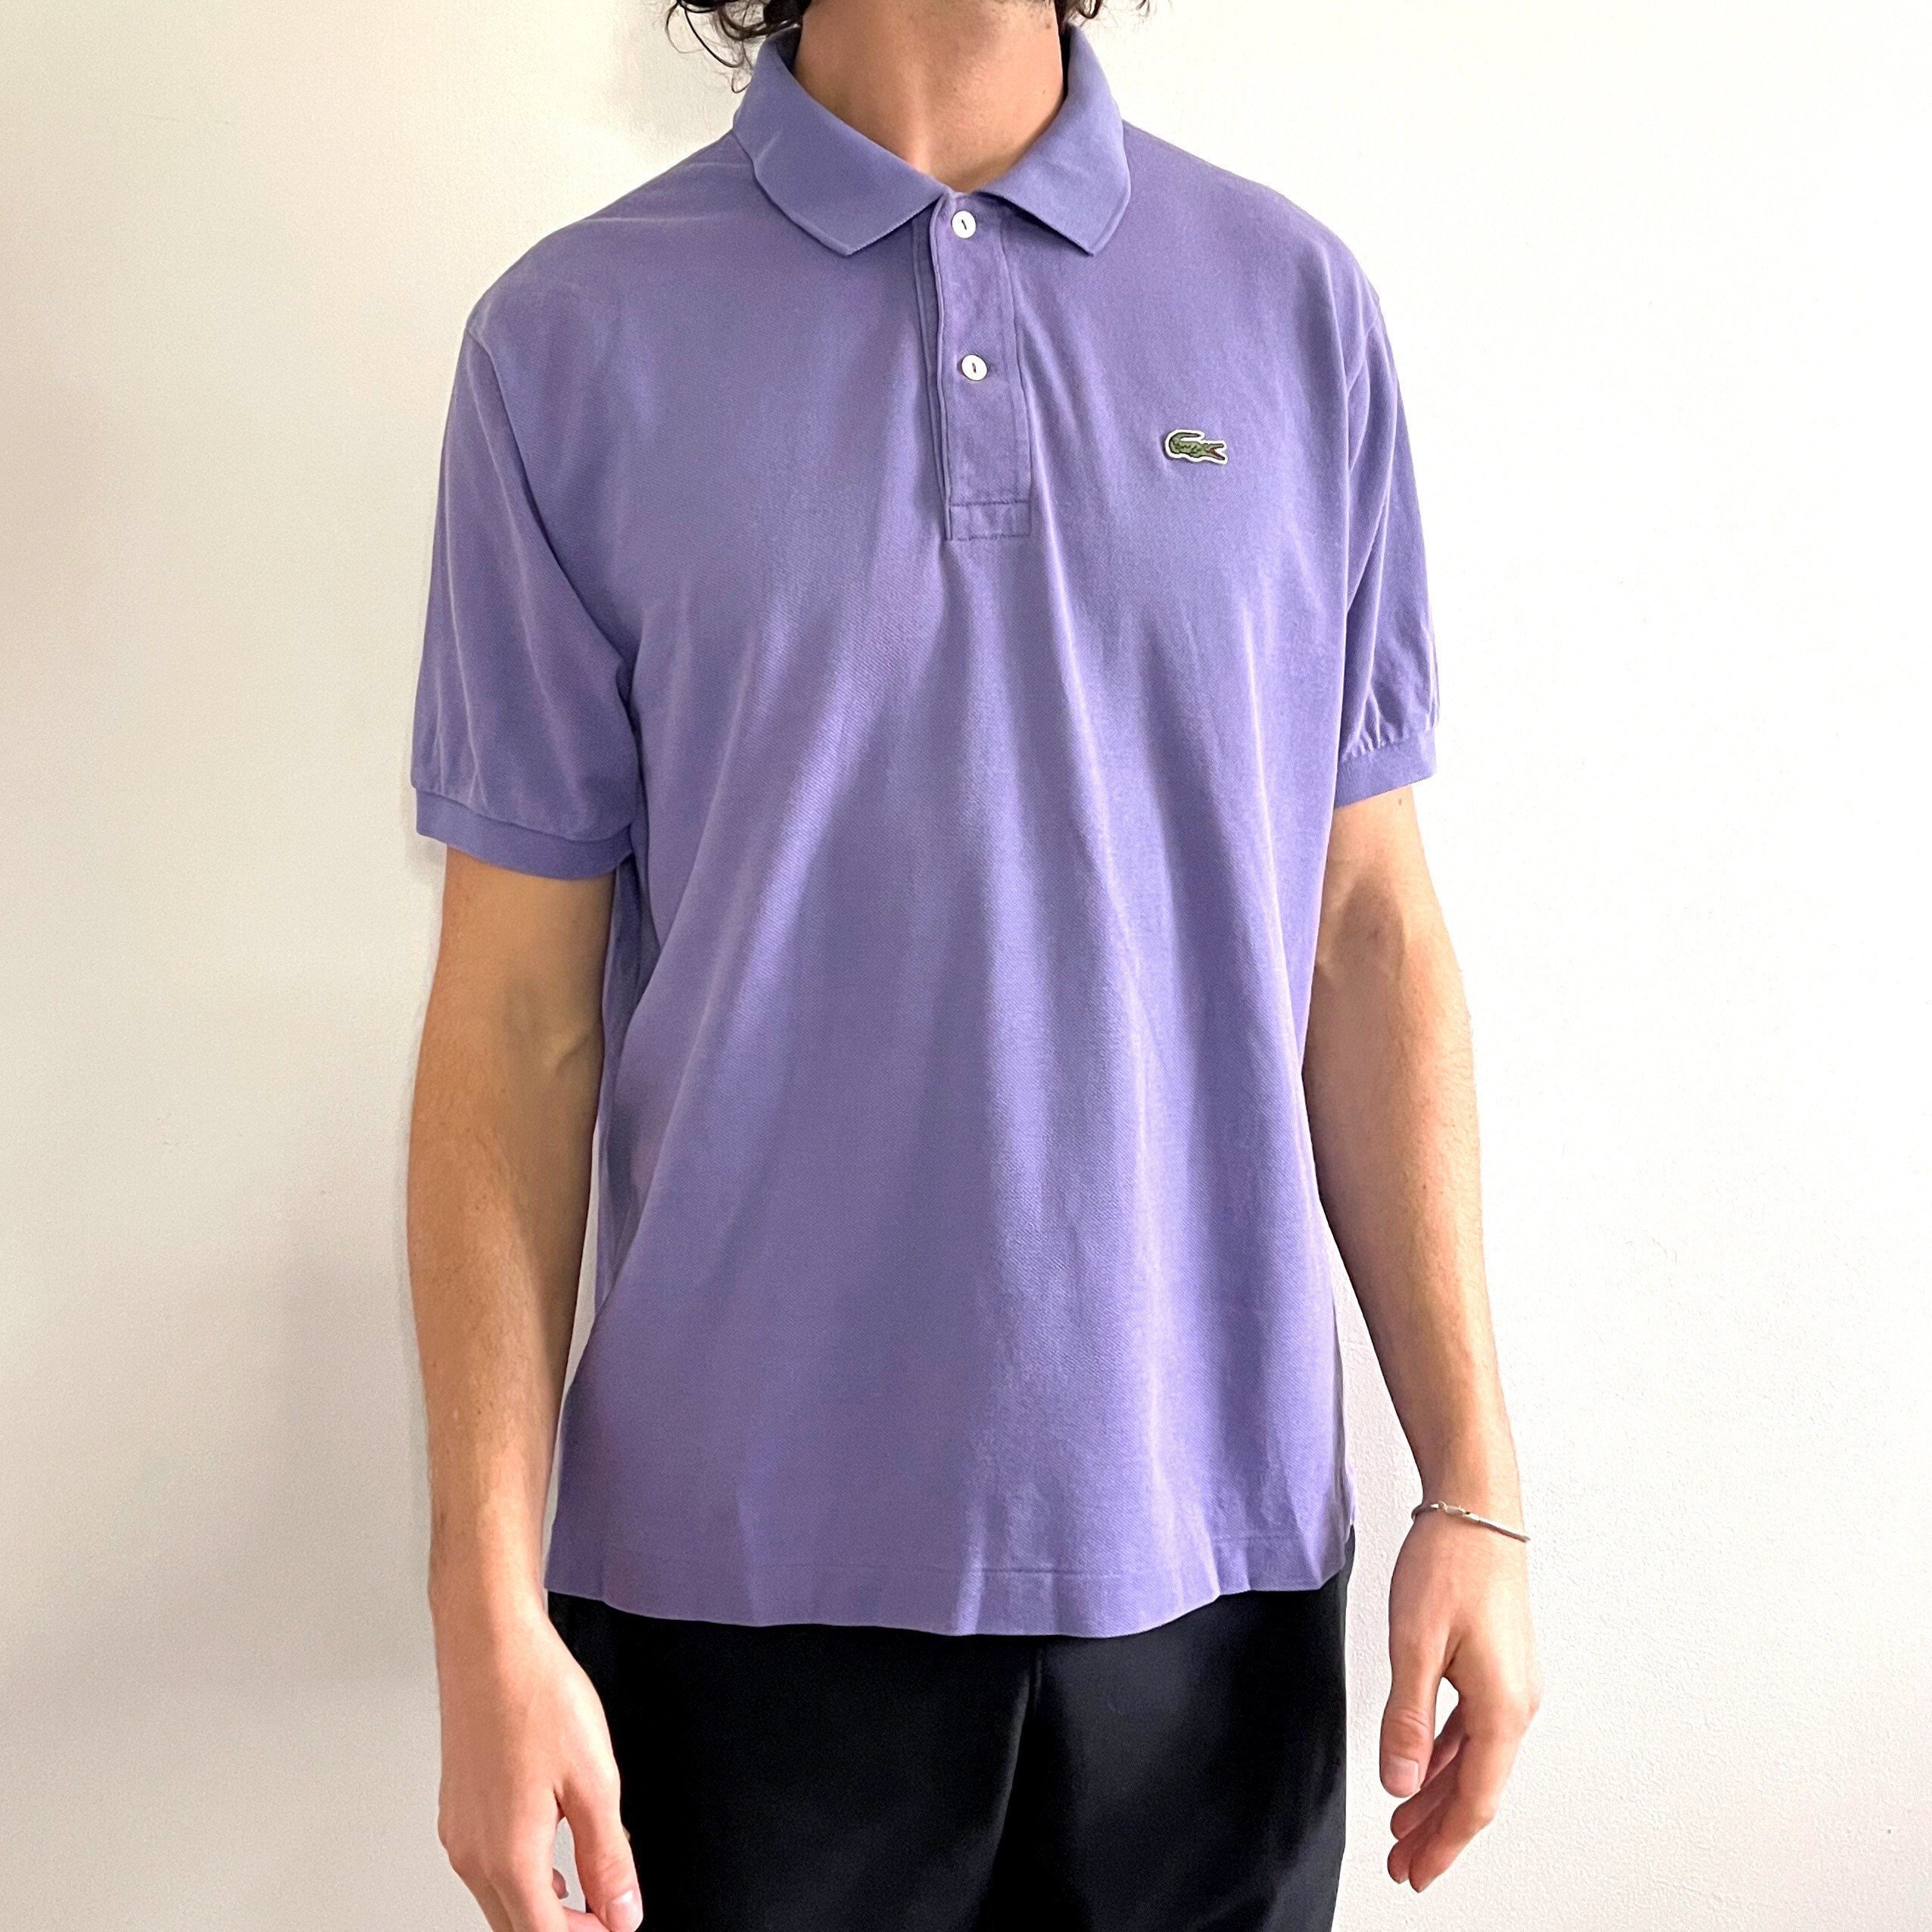 Violet Lacoste Polo Shirt // - Etsy